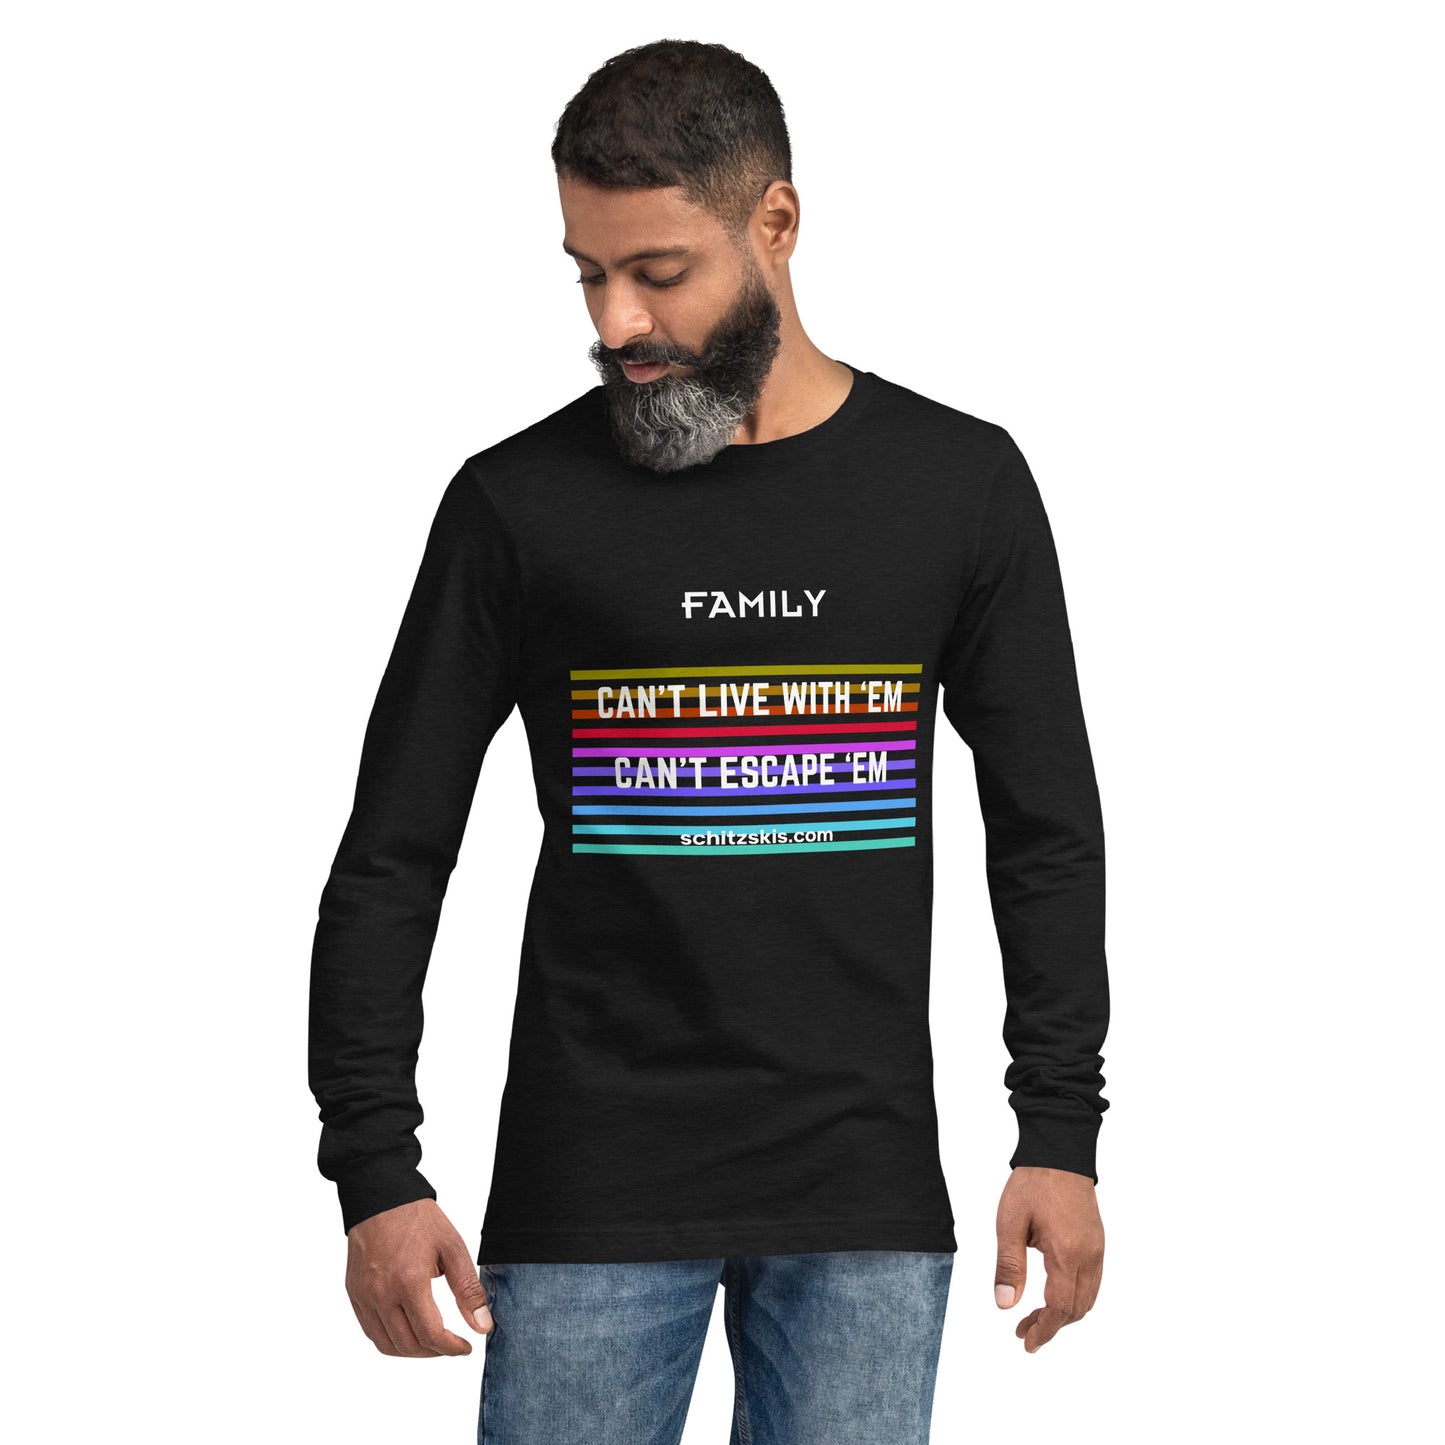 Can't Live with 'Em Unisex Long Sleeve Tee in Black color front view on male model